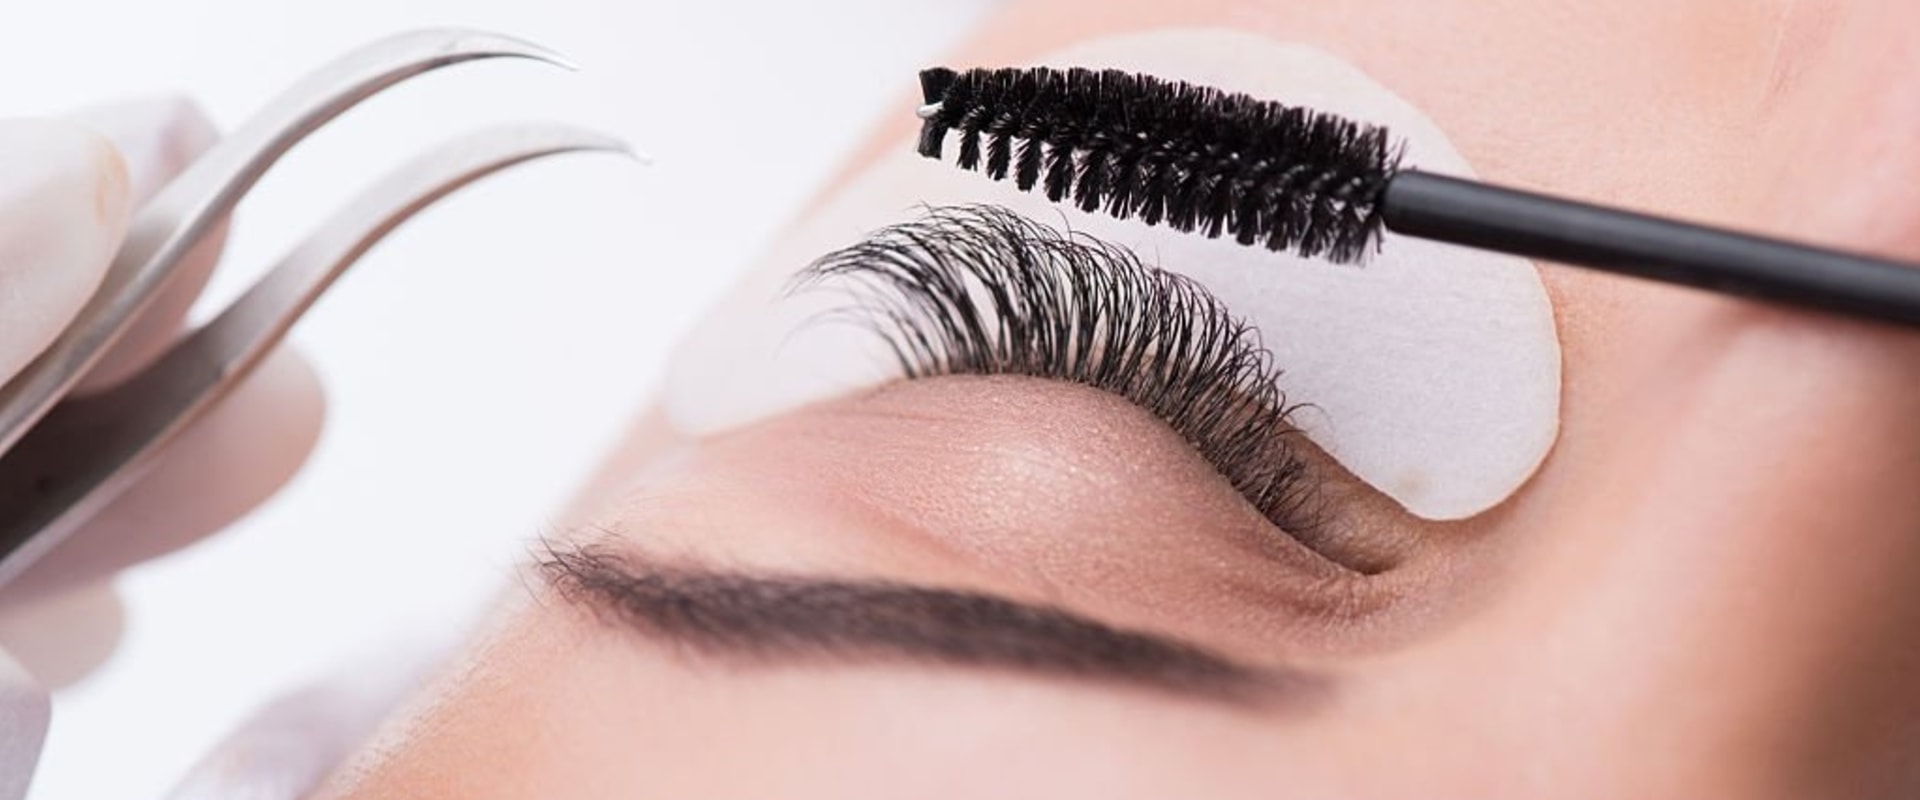 How Long Does It Take to See Growth in Eyelashes?